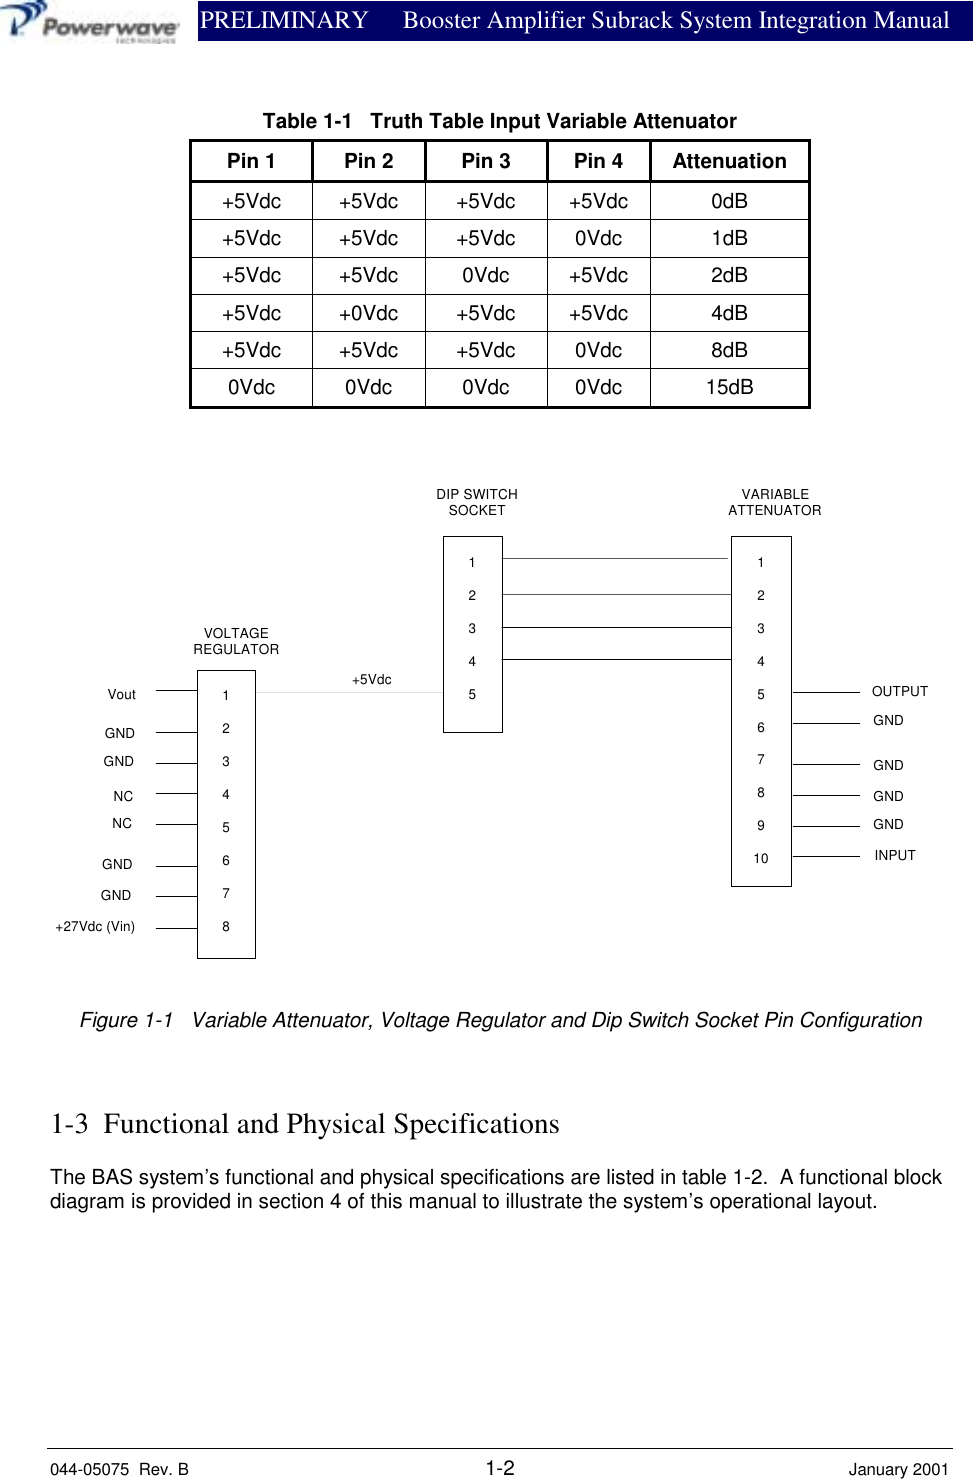                PRELIMINARY Booster Amplifier Subrack System Integration Manual044-05075  Rev. B 1-2 January 2001Table 1-1   Truth Table Input Variable AttenuatorPin 1 Pin 2 Pin 3 Pin 4 Attenuation+5Vdc +5Vdc +5Vdc +5Vdc 0dB+5Vdc +5Vdc +5Vdc 0Vdc 1dB+5Vdc +5Vdc 0Vdc +5Vdc 2dB+5Vdc +0Vdc +5Vdc +5Vdc 4dB+5Vdc +5Vdc +5Vdc 0Vdc 8dB0Vdc 0Vdc 0Vdc 0Vdc 15dB123456781234512345678910+5Vdc OUTPUTGNDGNDGNDGNDINPUTVoutGNDGNDNCNCGNDGND+27Vdc (Vin)VOLTAGEREGULATORDIP SWITCHSOCKET VARIABLEATTENUATORFigure 1-1   Variable Attenuator, Voltage Regulator and Dip Switch Socket Pin Configuration1-3  Functional and Physical SpecificationsThe BAS system’s functional and physical specifications are listed in table 1-2.  A functional blockdiagram is provided in section 4 of this manual to illustrate the system’s operational layout.